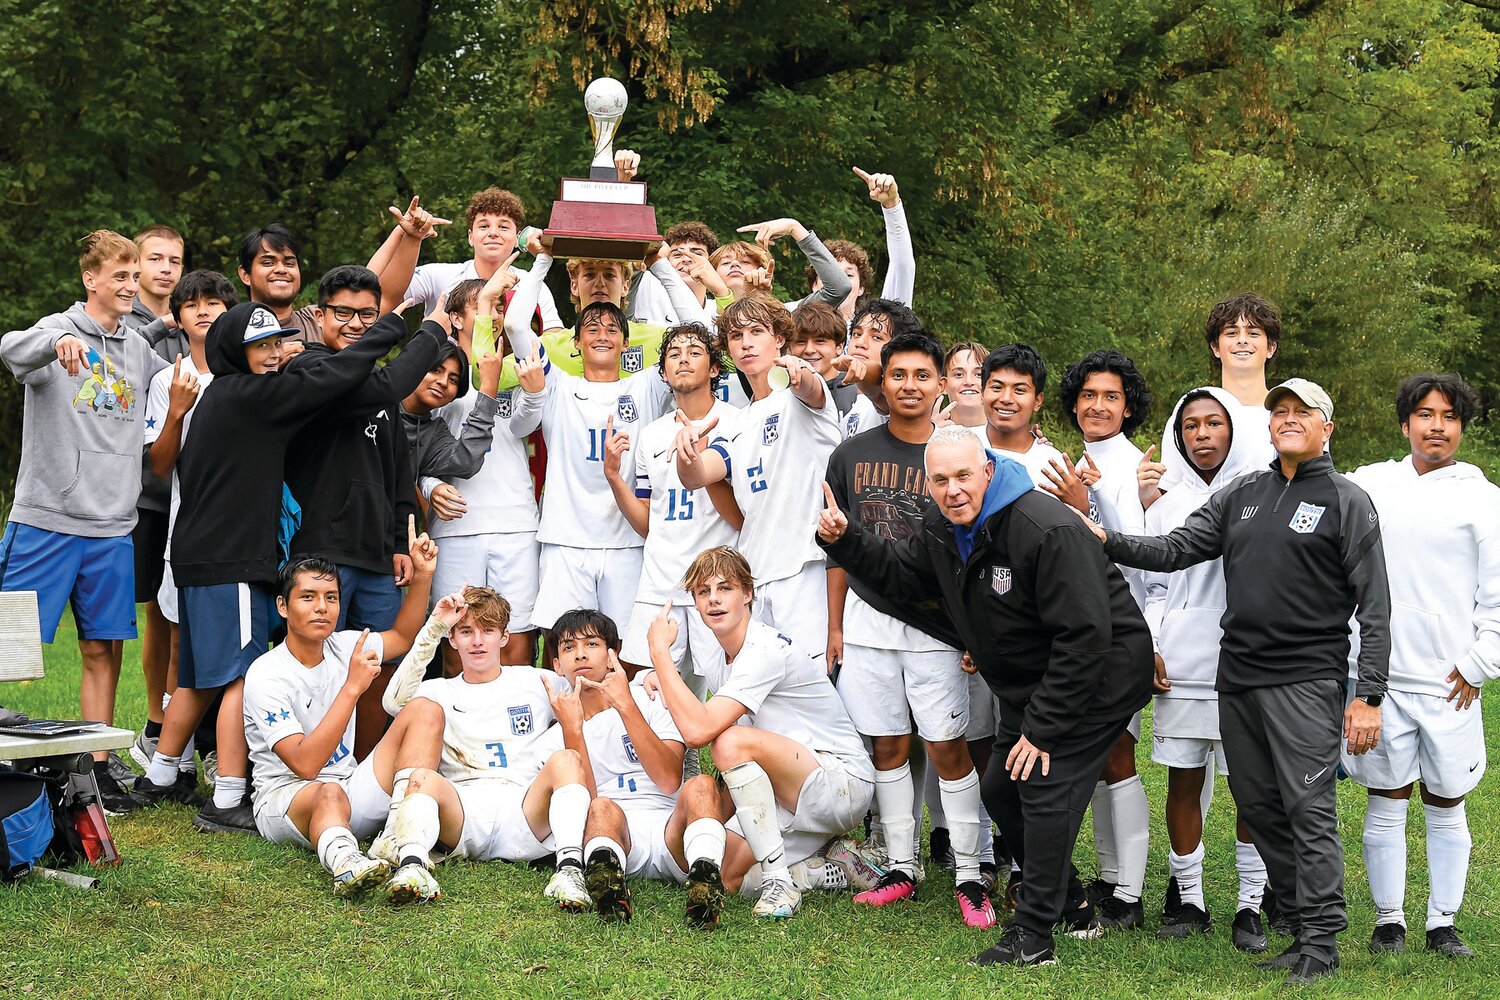 South Hunterdon celebrates with the River Cup trophy after a 4-2 win over Solebury.